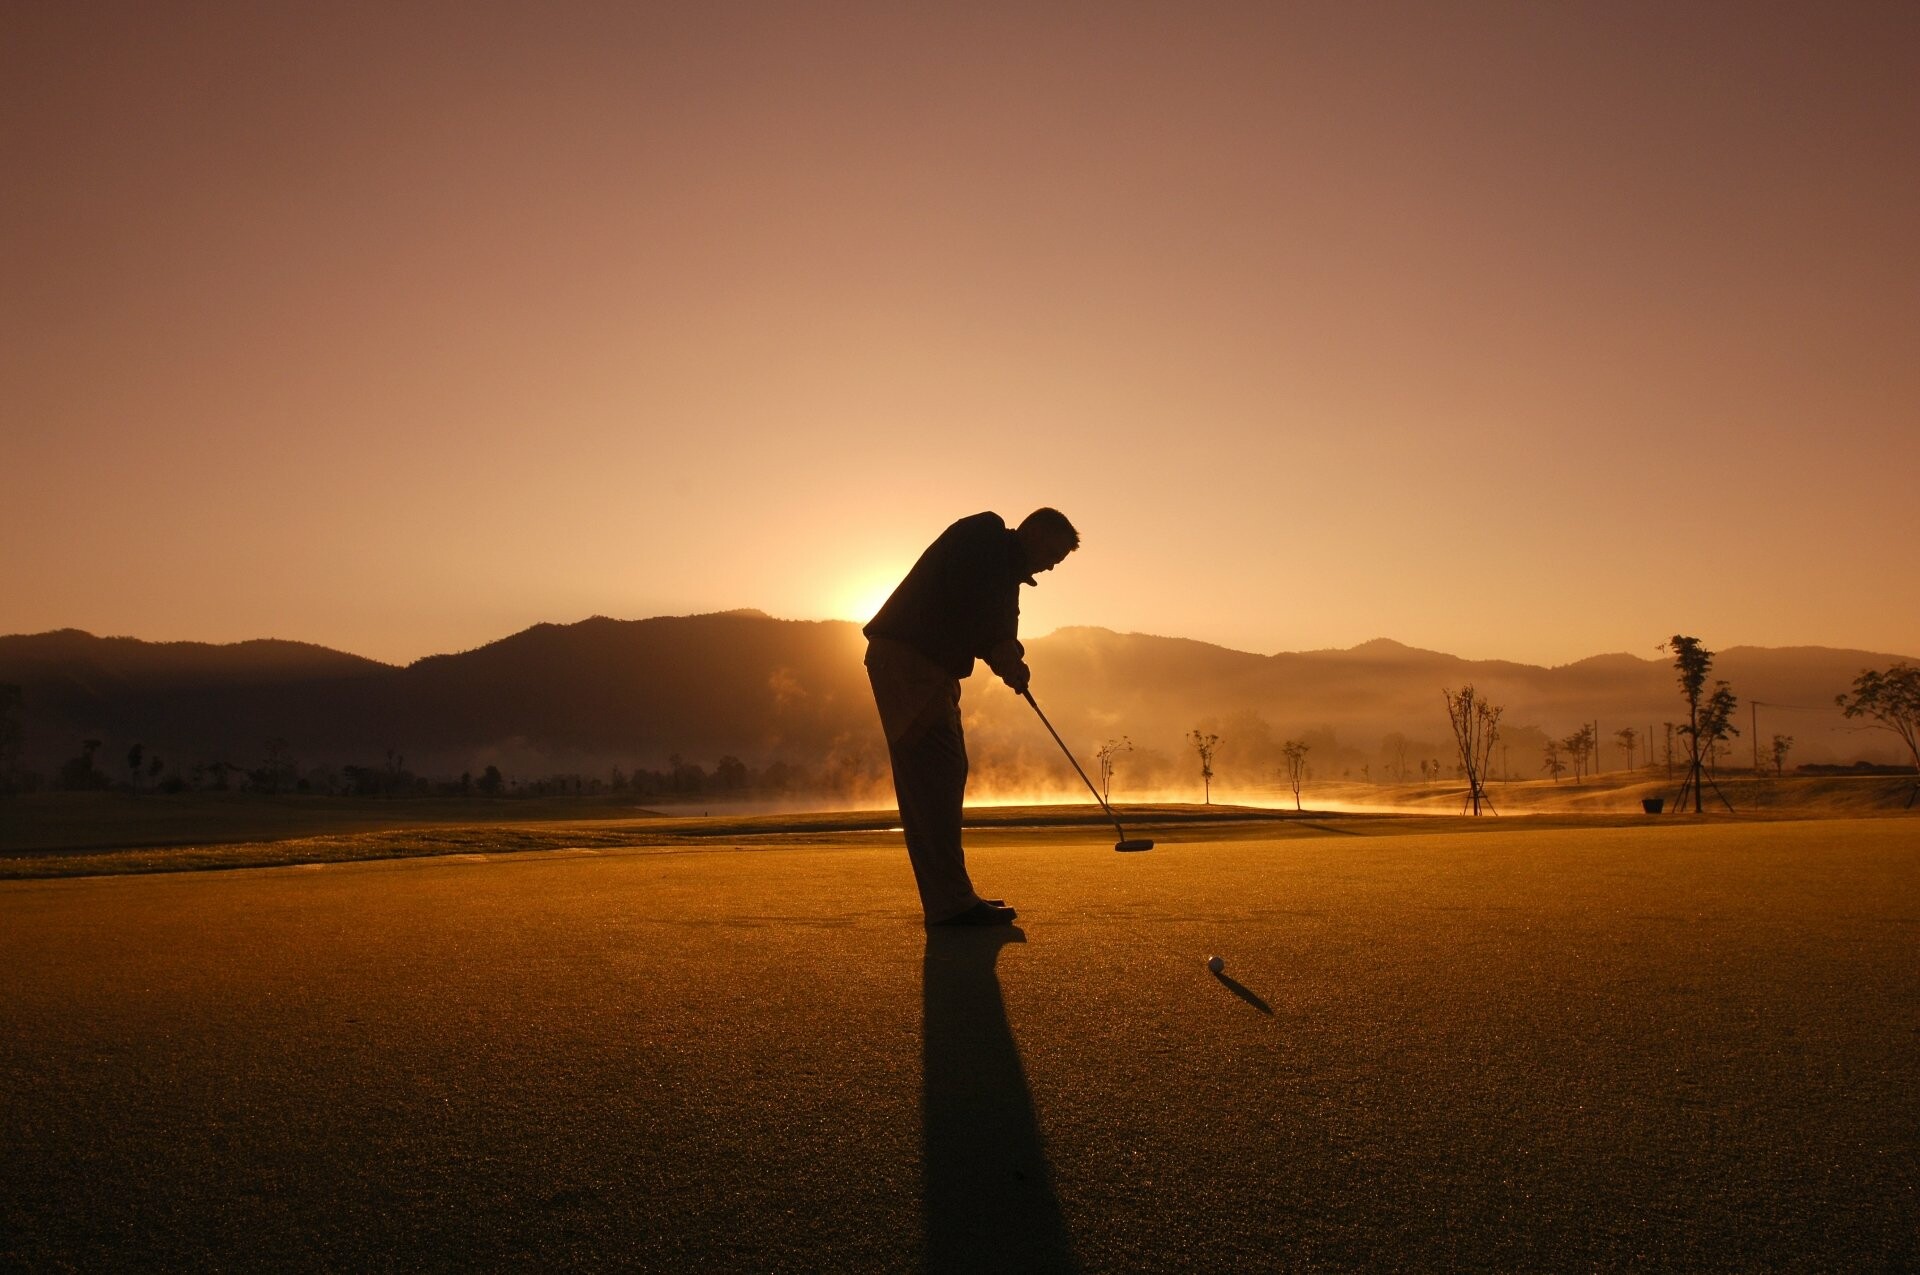 Golf: The golfer playing his ball into a hole by using different types of clubs, Course. 1920x1280 HD Wallpaper.